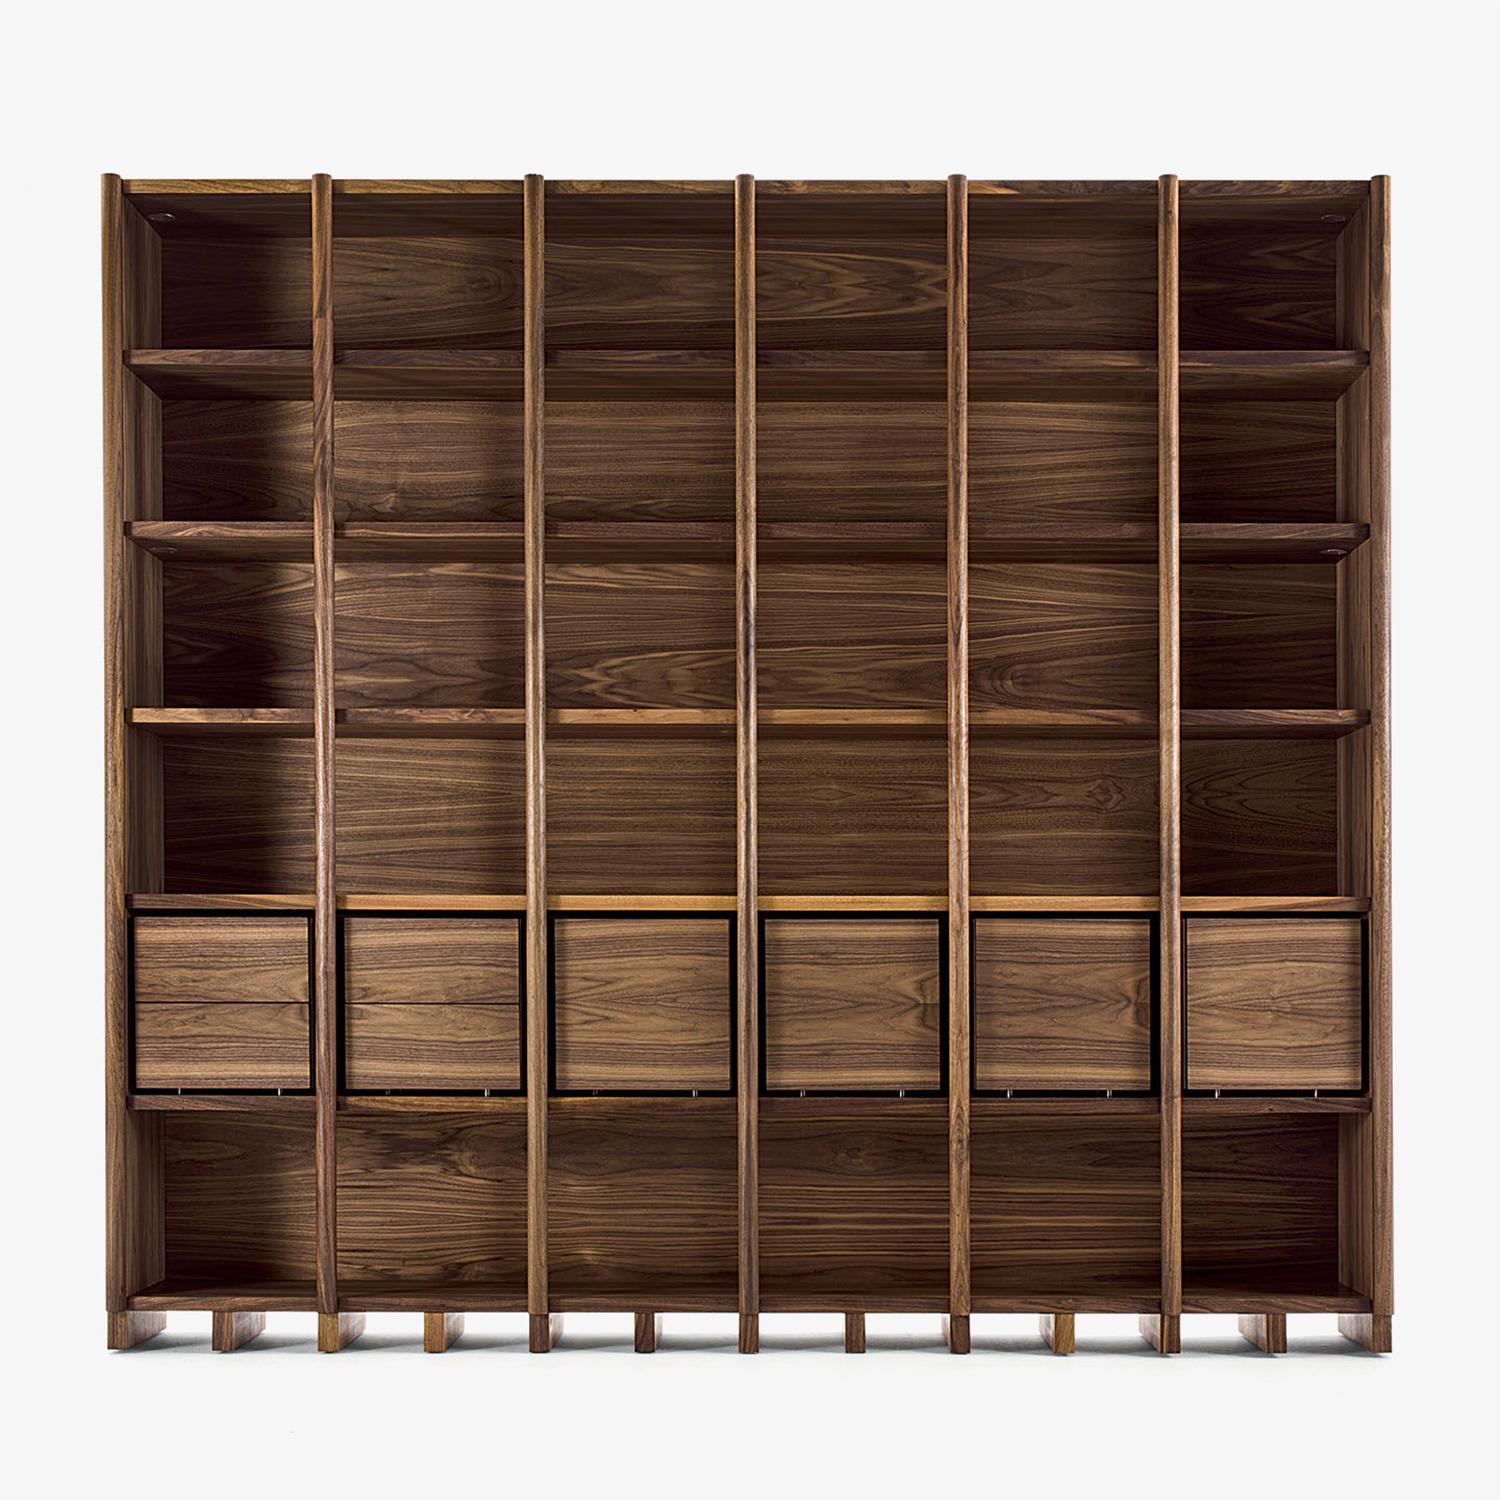 Bookcase library with solid walnut wood structure,
with modular shelves and sides system according
to furnishing needs. With 2 drawers module on the 
left side, with 2 doors module in the middle of the 
bookcase and with 2 big square drawers